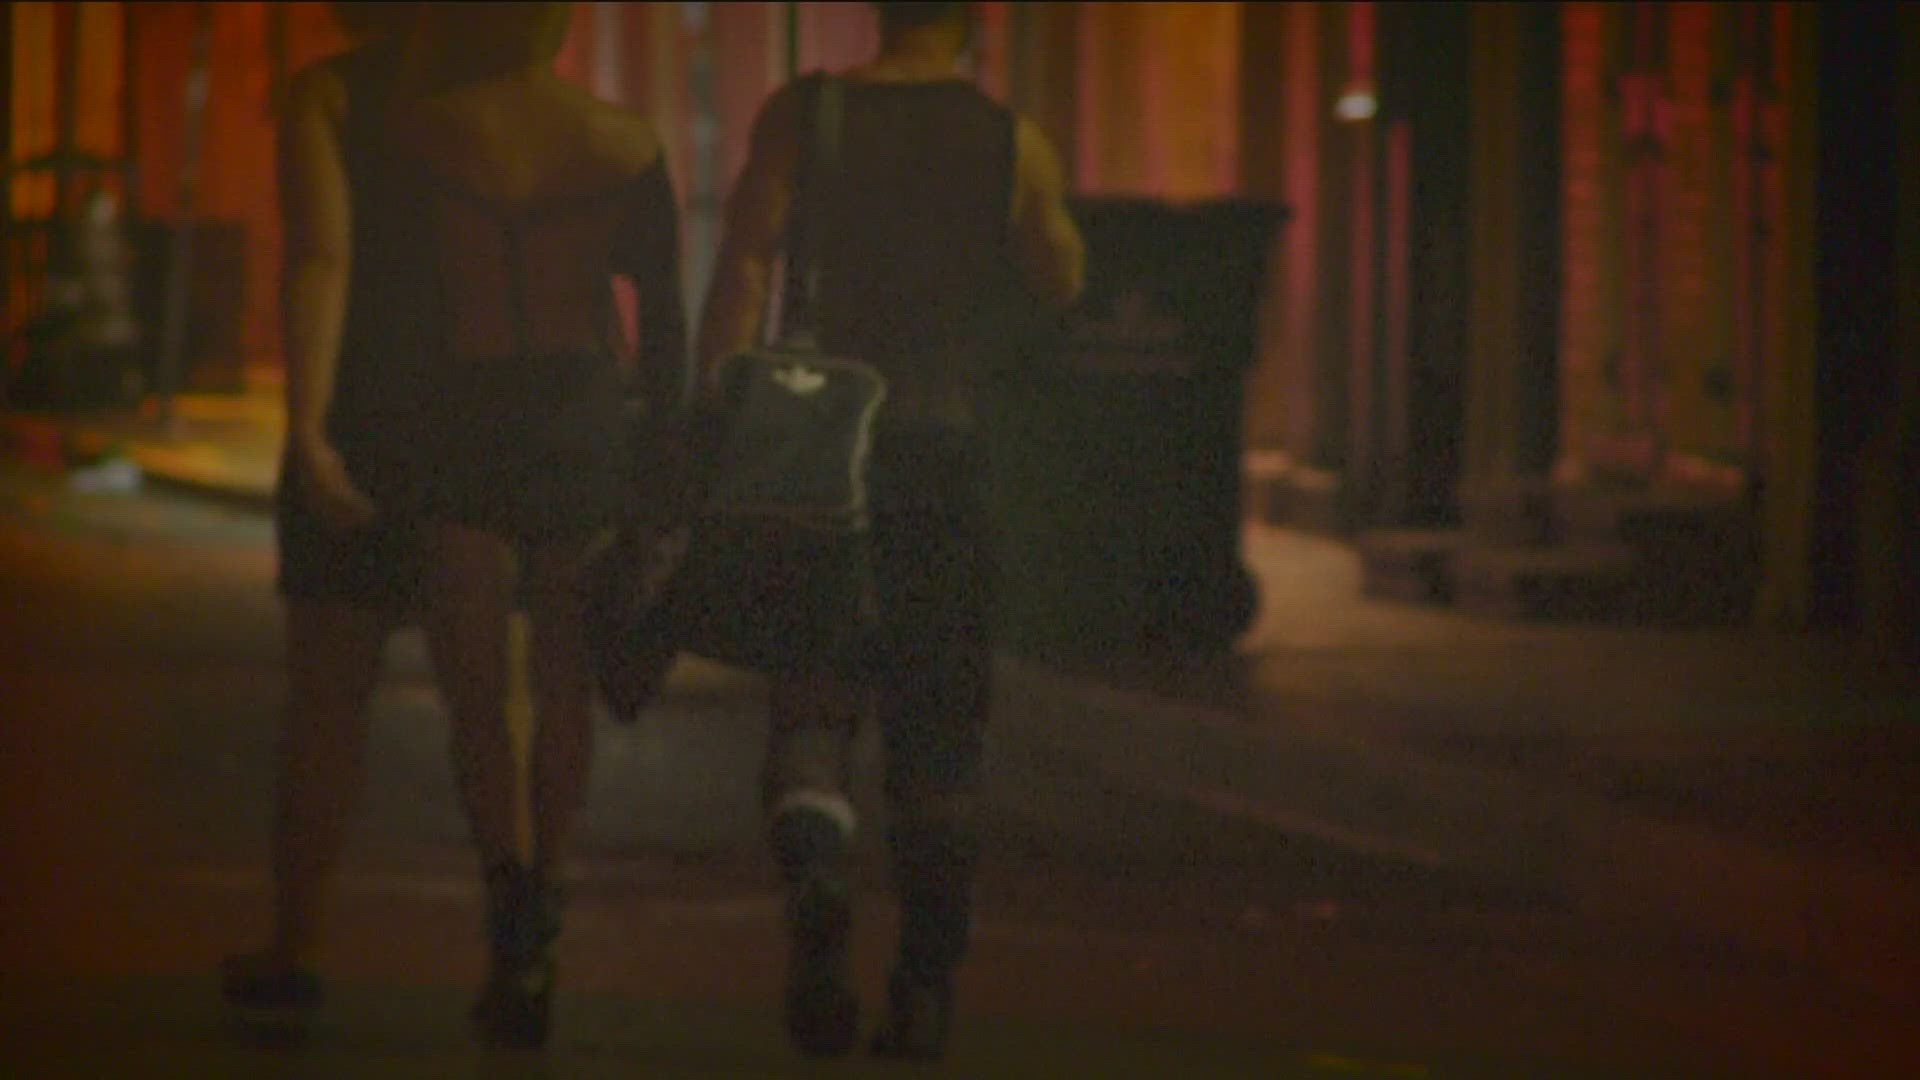 Ohio has the fourth-highest number of reported human trafficking cases in the nation.